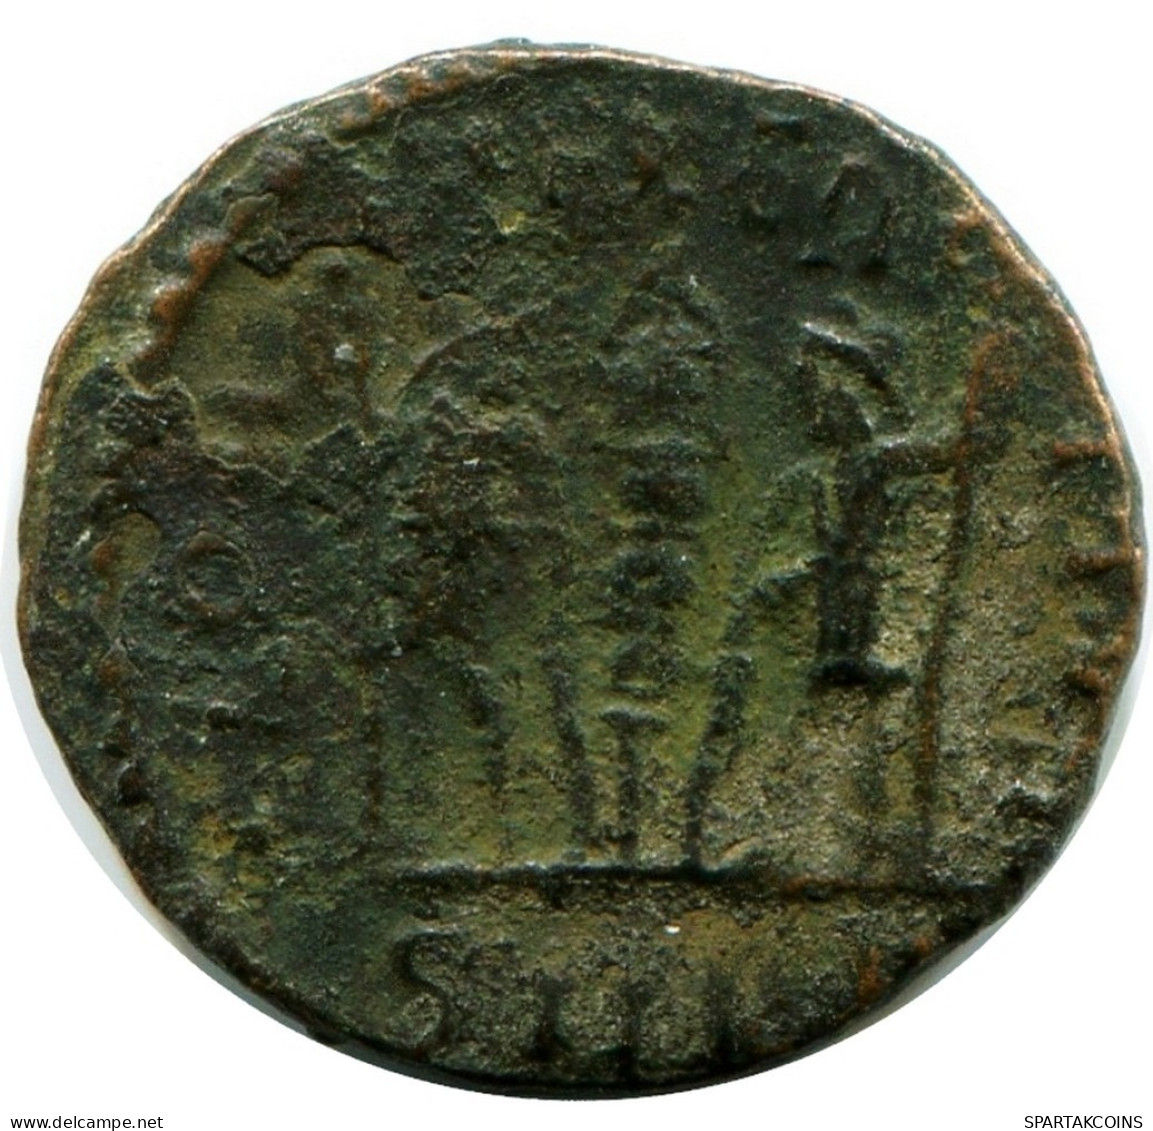 CONSTANS MINTED IN CYZICUS FOUND IN IHNASYAH HOARD EGYPT #ANC11594.14.U.A - The Christian Empire (307 AD To 363 AD)